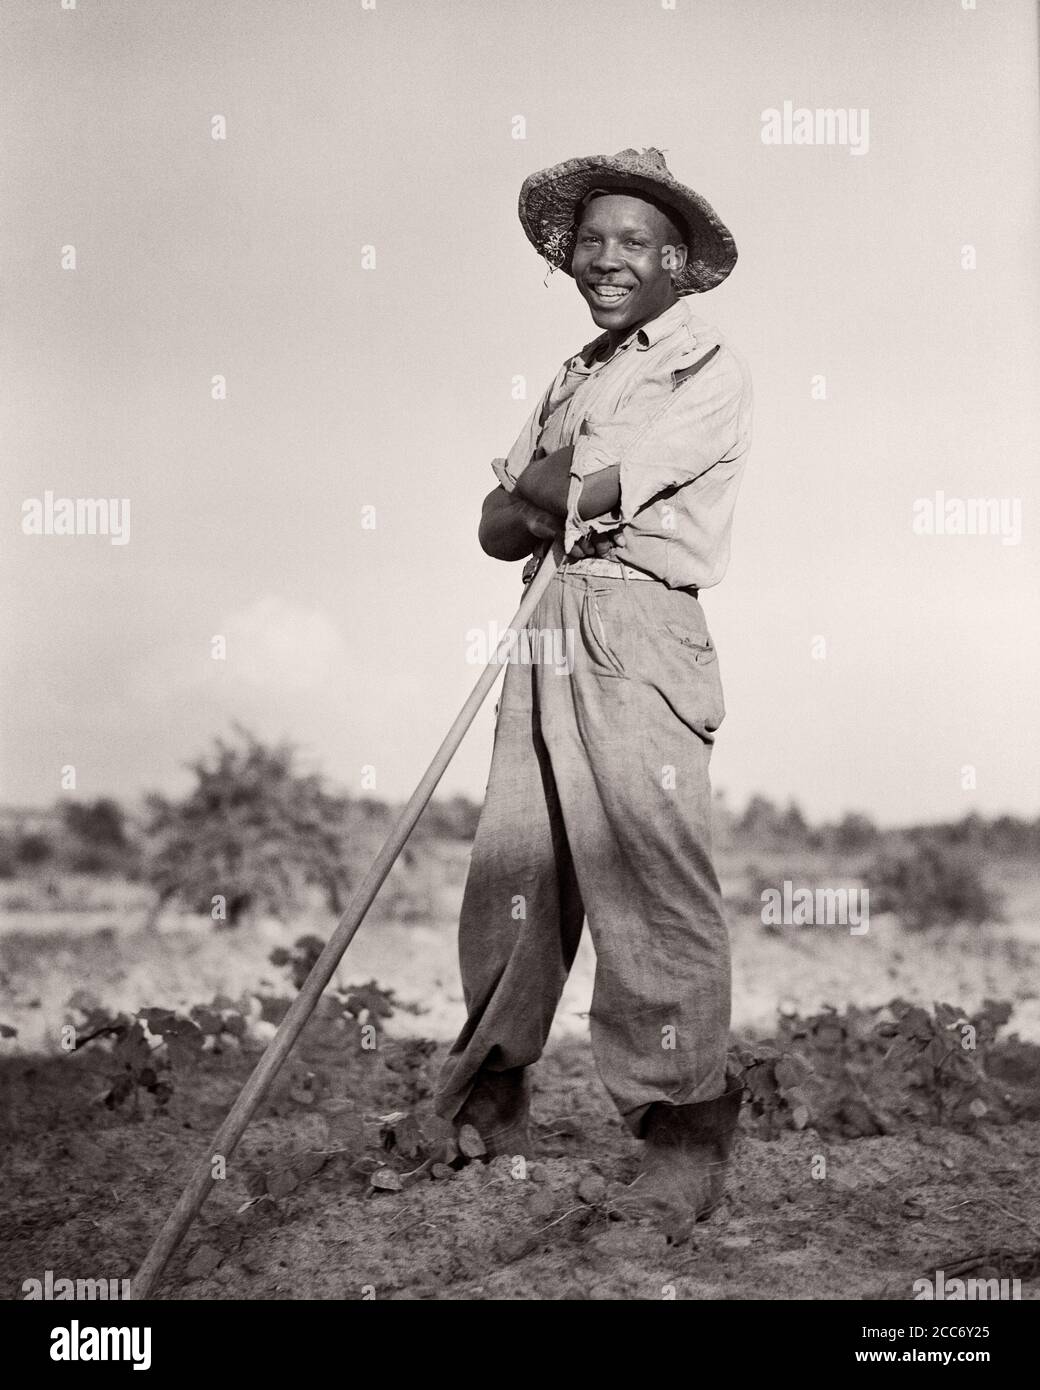 1930s SMILING AFRICAN-AMERICAN MAN TOBACCO FARMER WEARING STRAW HAT STANDING LEANING ON HOE LOOKING AT CAMERA NORTH CAROLINA USA - n68 HAR001 HARS 1 FACIAL LAUGH PLEASED JOY LIFESTYLE SATISFACTION JOBS POOR RURAL UNITED STATES COPY SPACE FULL-LENGTH PERSONS UNITED STATES OF AMERICA FARMING MALES CONFIDENCE EXPRESSIONS AGRICULTURE B&W NORTH AMERICA EYE CONTACT NORTH AMERICAN SKILL OCCUPATION HAPPINESS SKILLS CHEERFUL STRENGTH TOBACCO AFRICAN-AMERICANS AFRICAN-AMERICAN FARMERS LOW ANGLE BLACK ETHNICITY LABOR PRIDE ON EMPLOYMENT OCCUPATIONS CONCEPTUAL HANDLE JOYFUL HOE SHARECROPPER EMPLOYEE Stock Photo